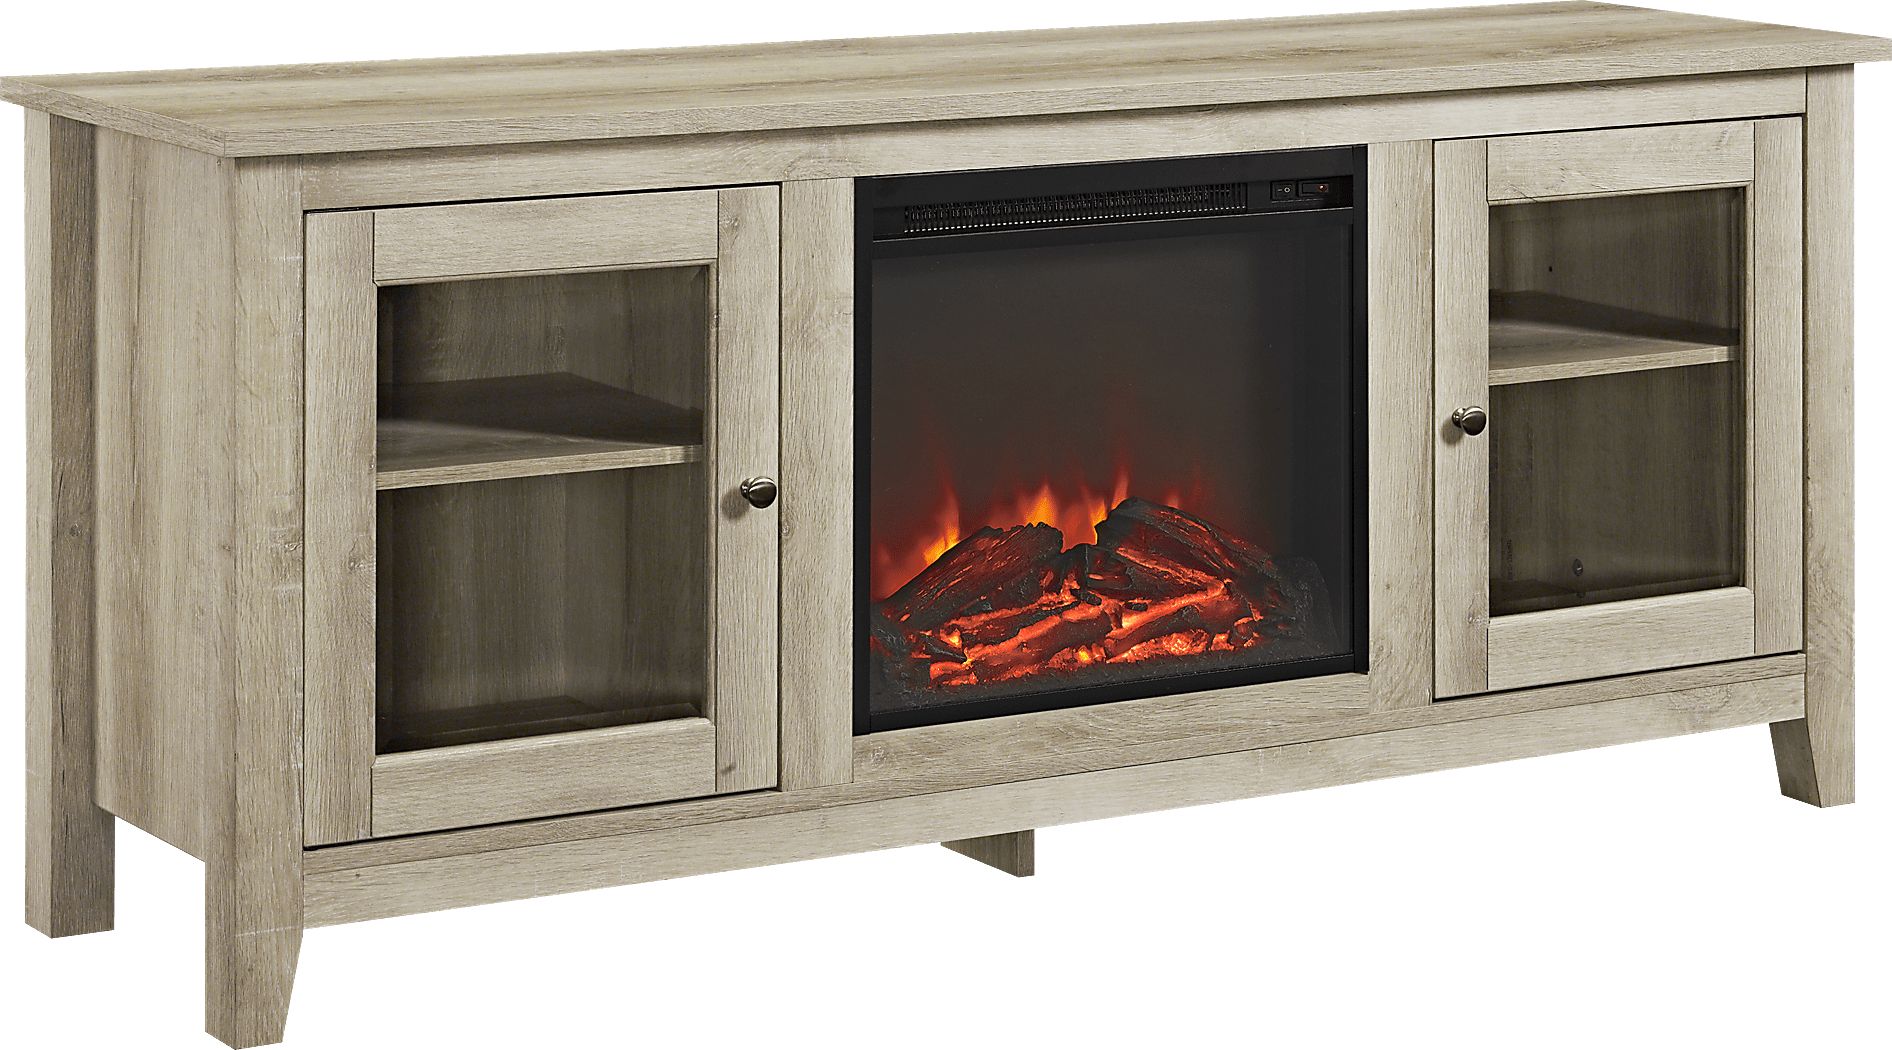 Blaize White 58 in. Console with Electric Fireplace